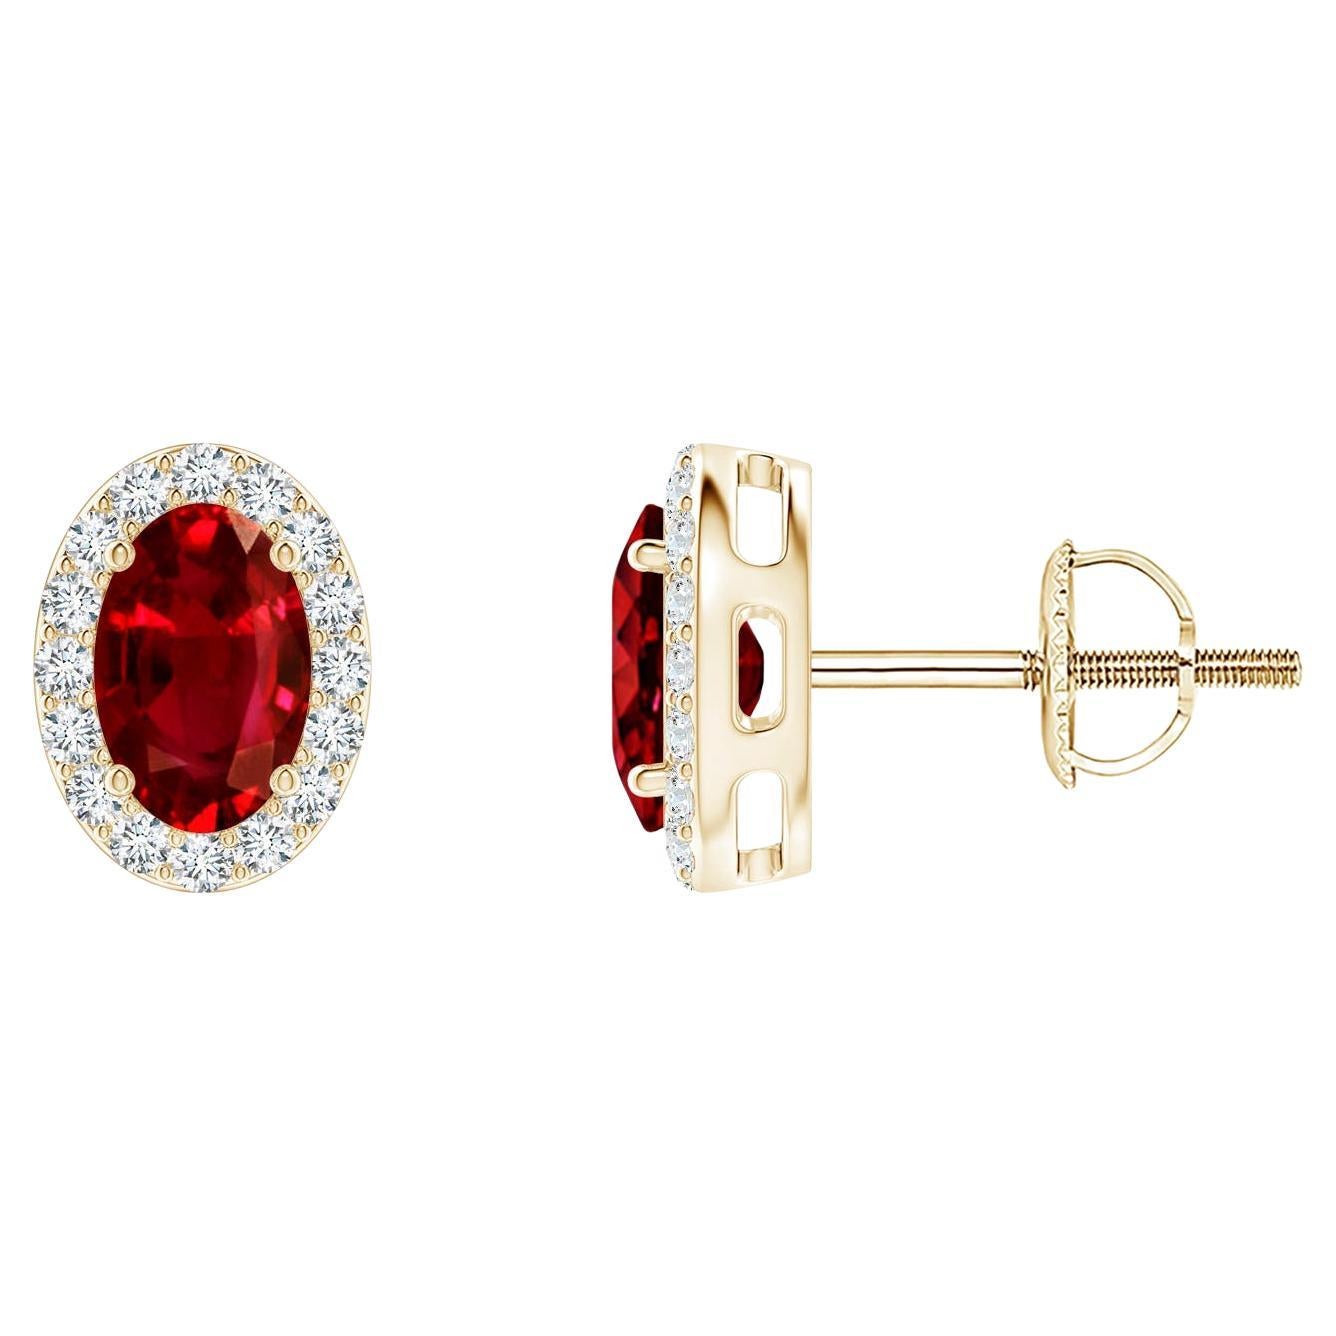 ANGARA Natural Oval 1.20ct Ruby Studs with Diamond Halo in 14K Yellow Gold